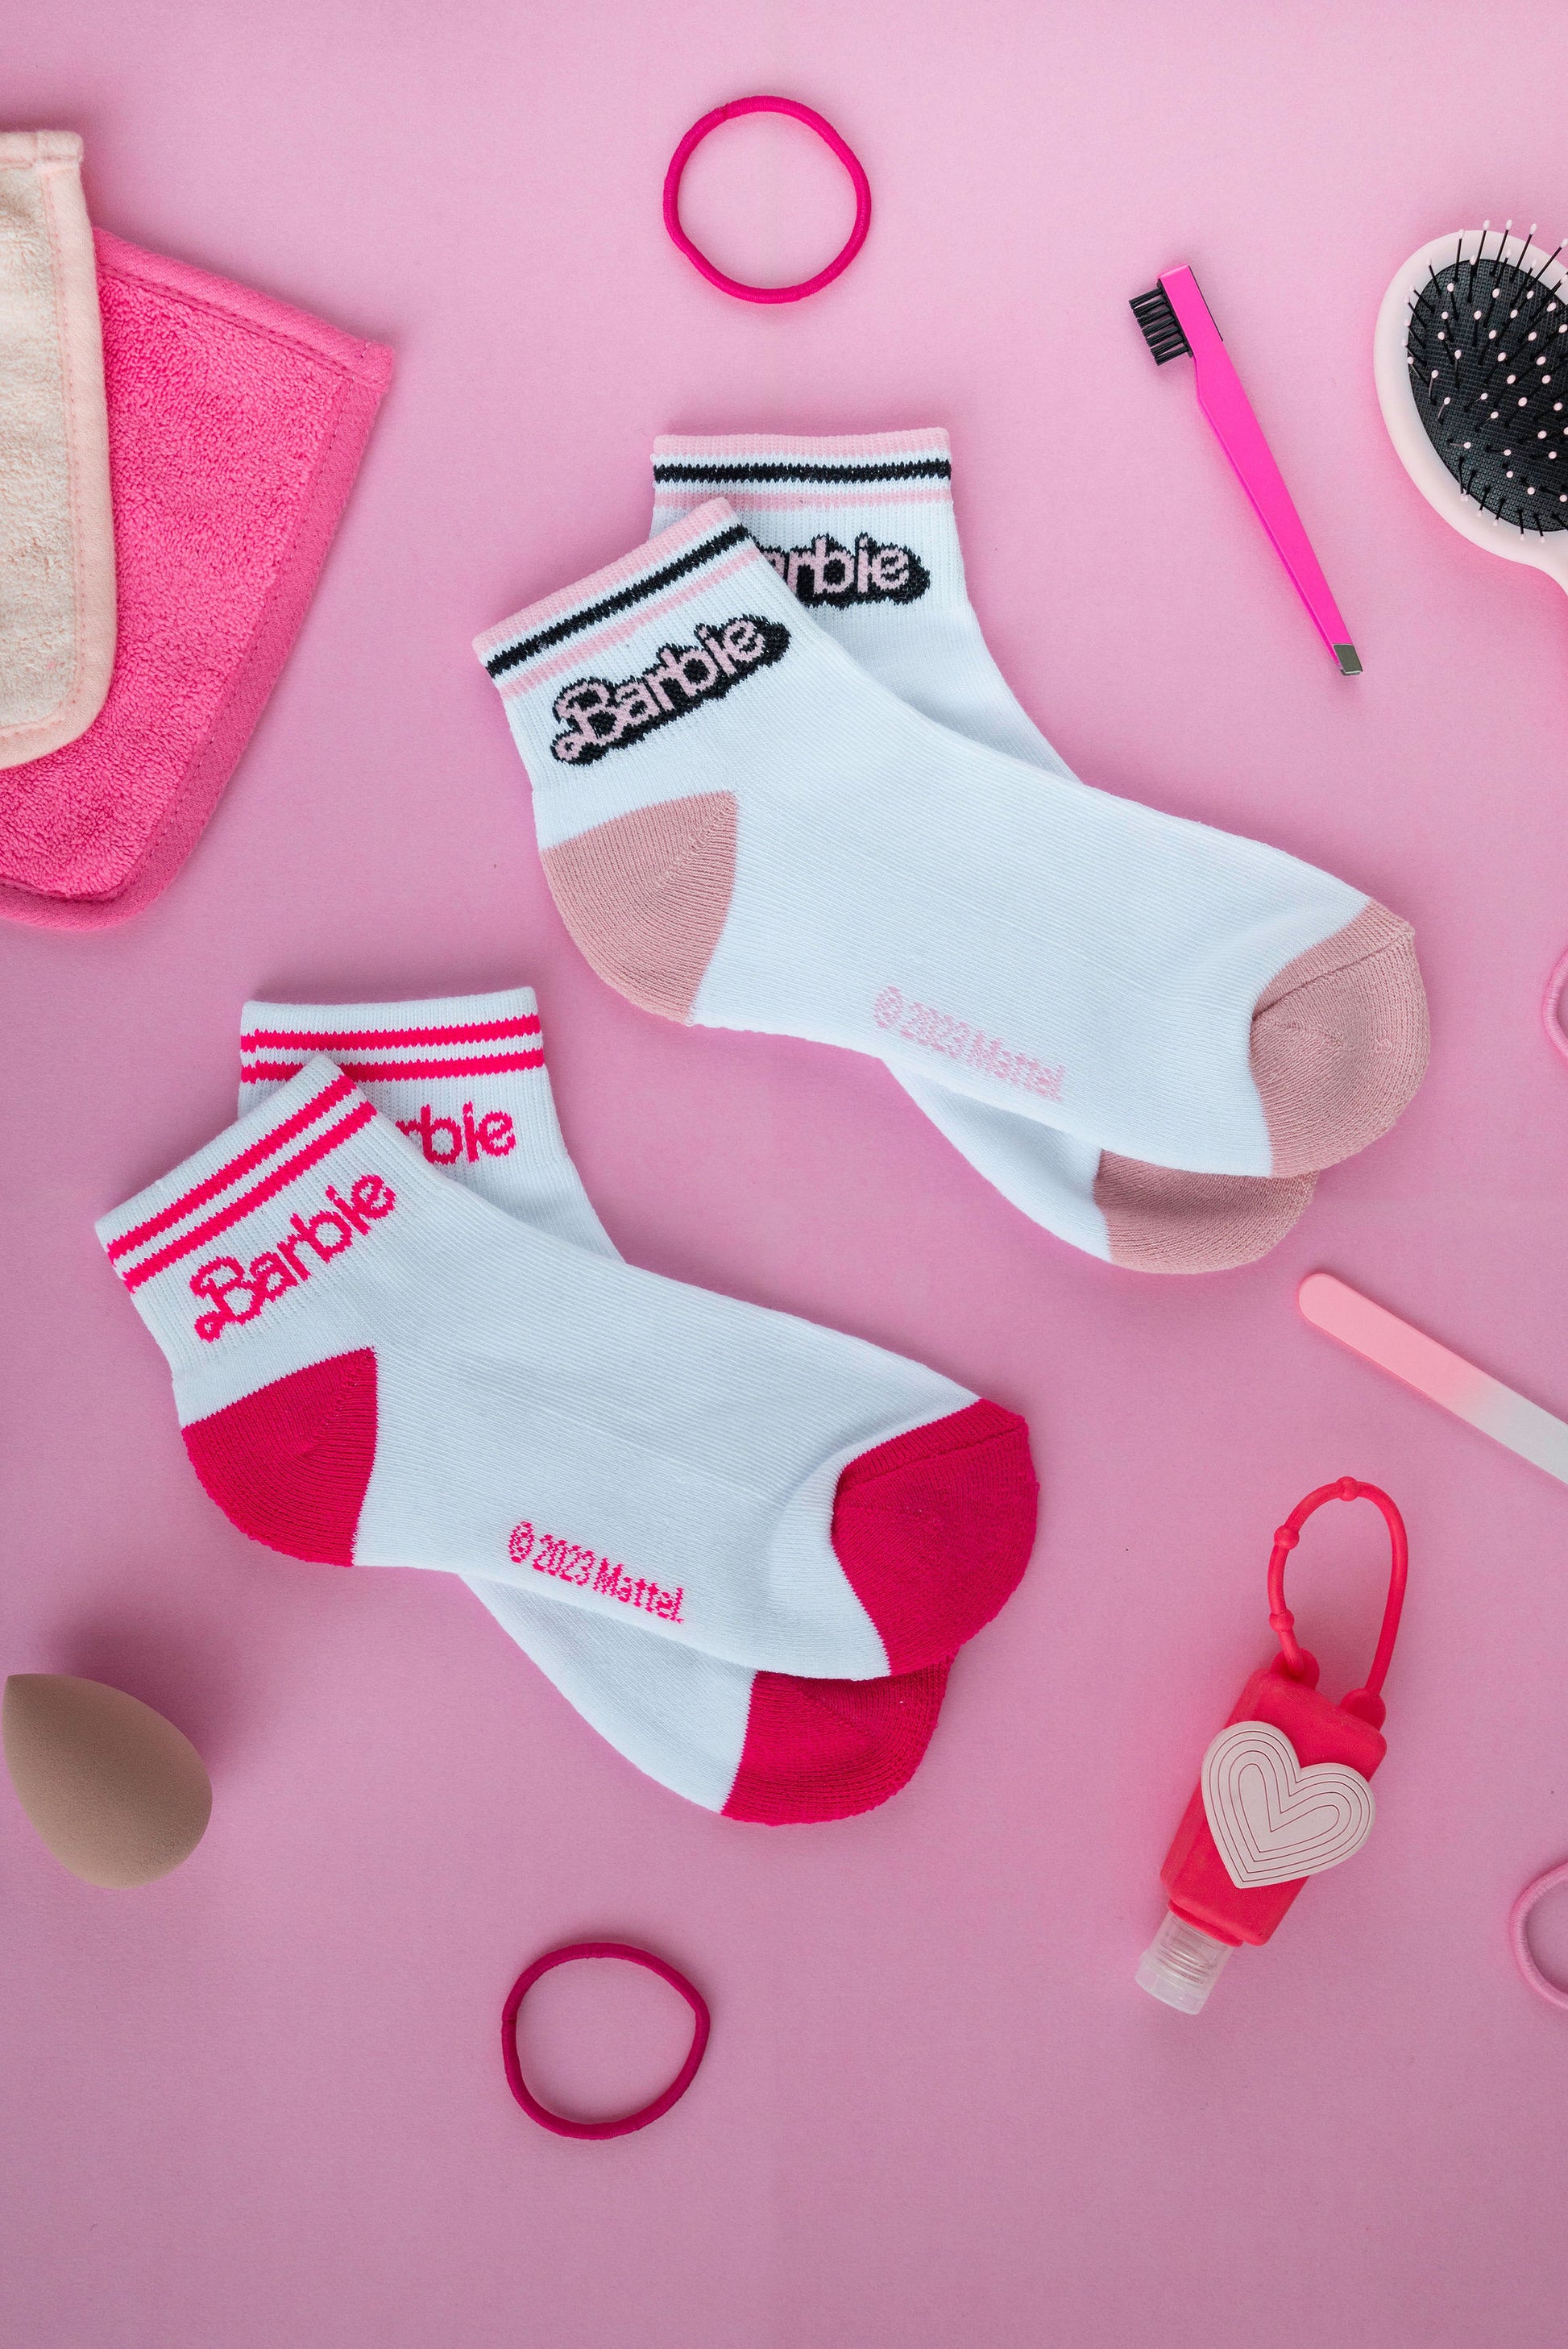 Stronger Together. The Barbie + Sheertex collection is here